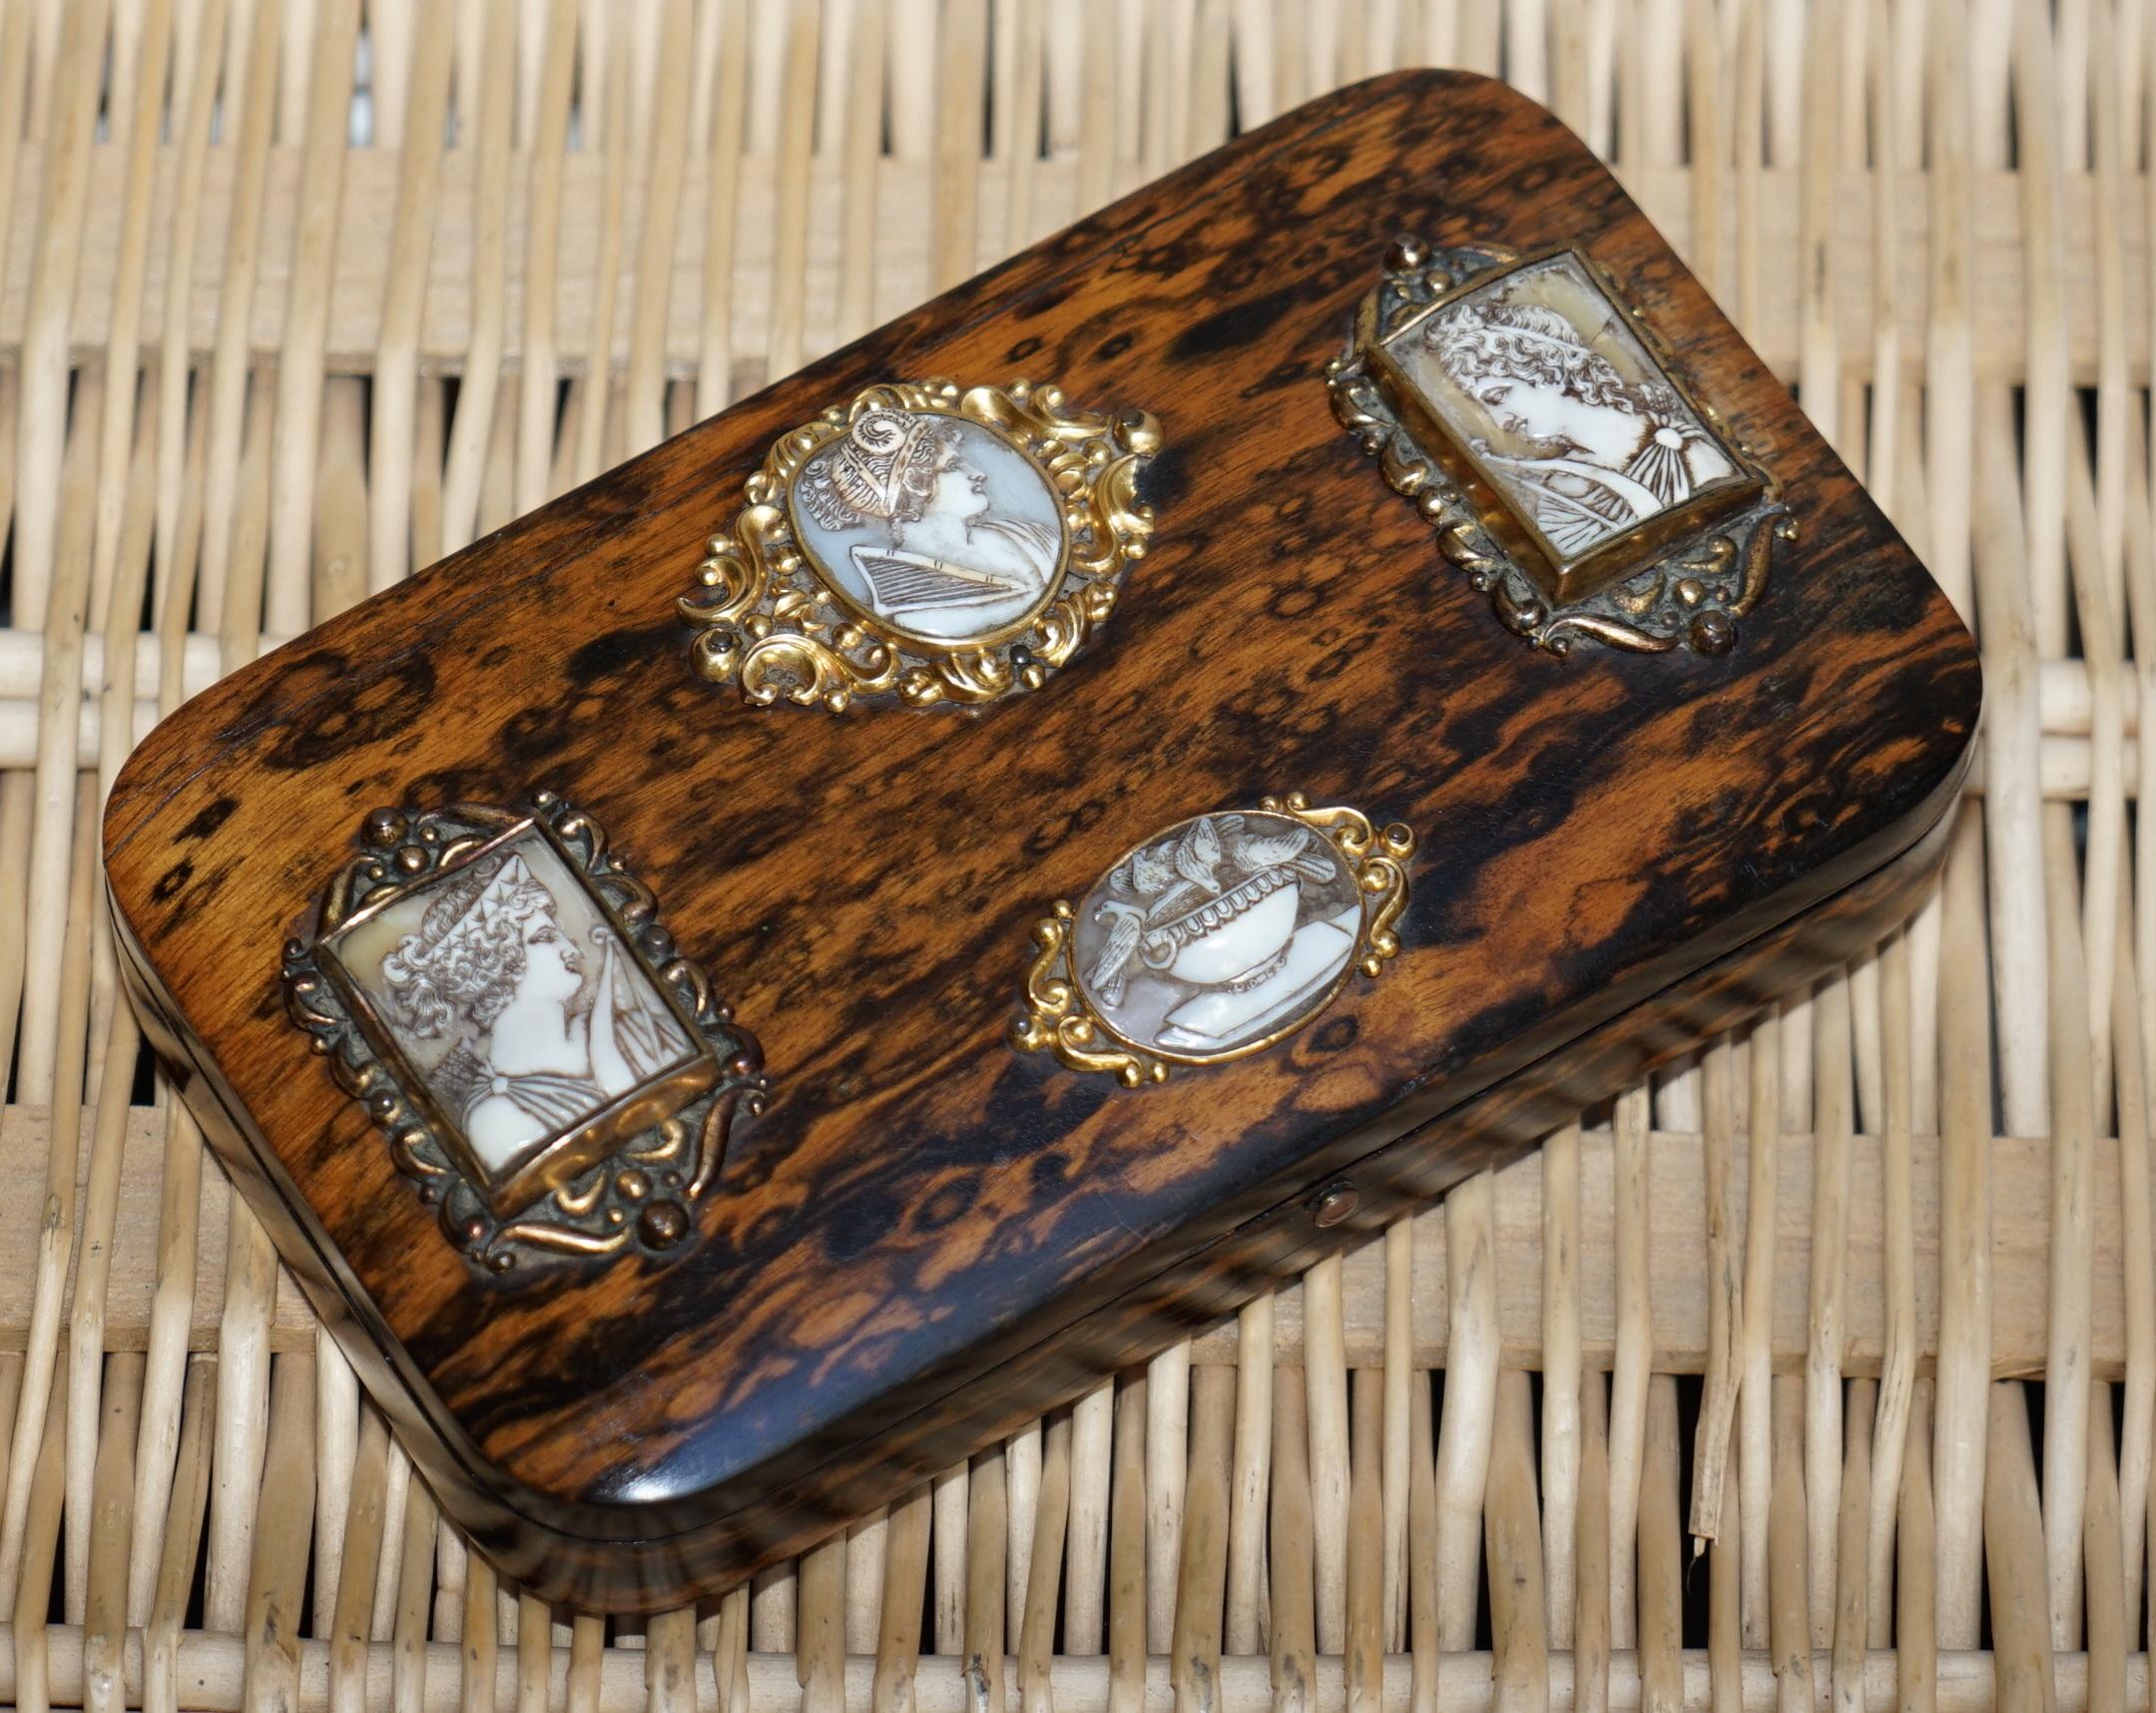 We are delighted to offer for sale this very rare circa 1860 Coromandel wood gold gilt Etui sewing kit with Asprey pencil and shell cameos

A very ornately engraved and extremely high quality mid-19th century Coromandel veneered Etui, the case of